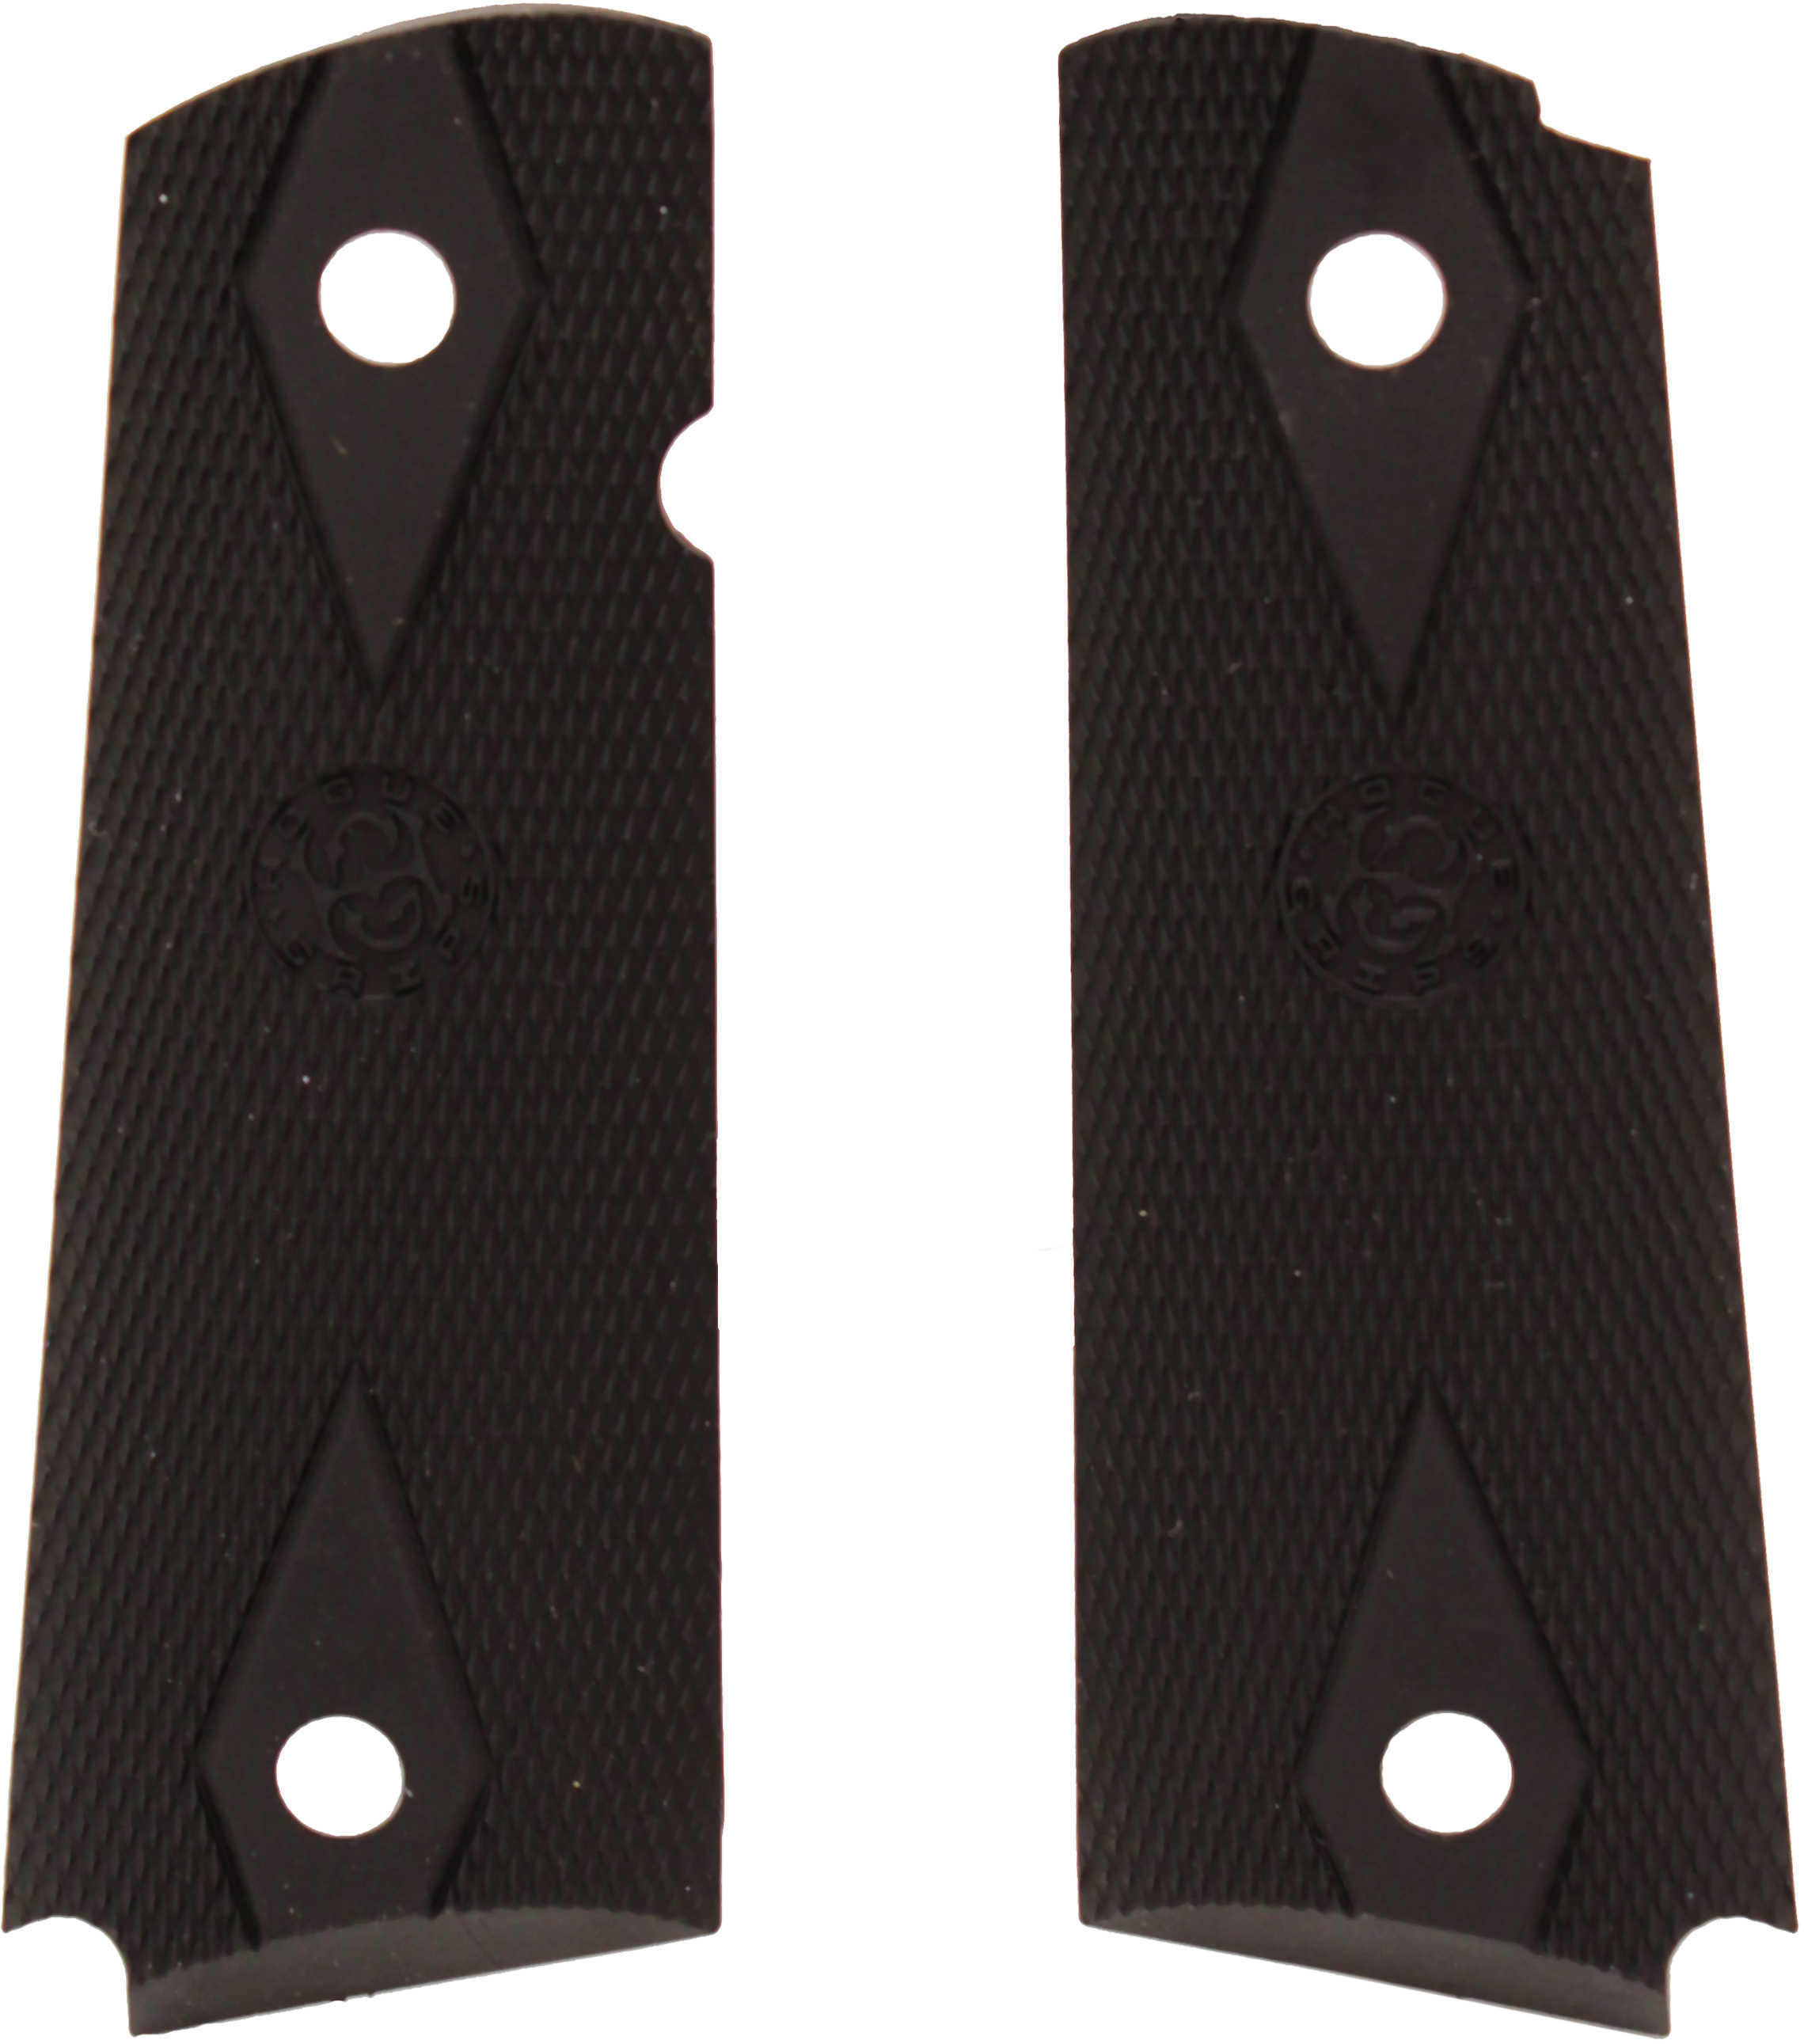 Hogue Rubber Grip Panels Colt Government Traditional Double Diamond checkering Pattern Around The Screw holes - Durable